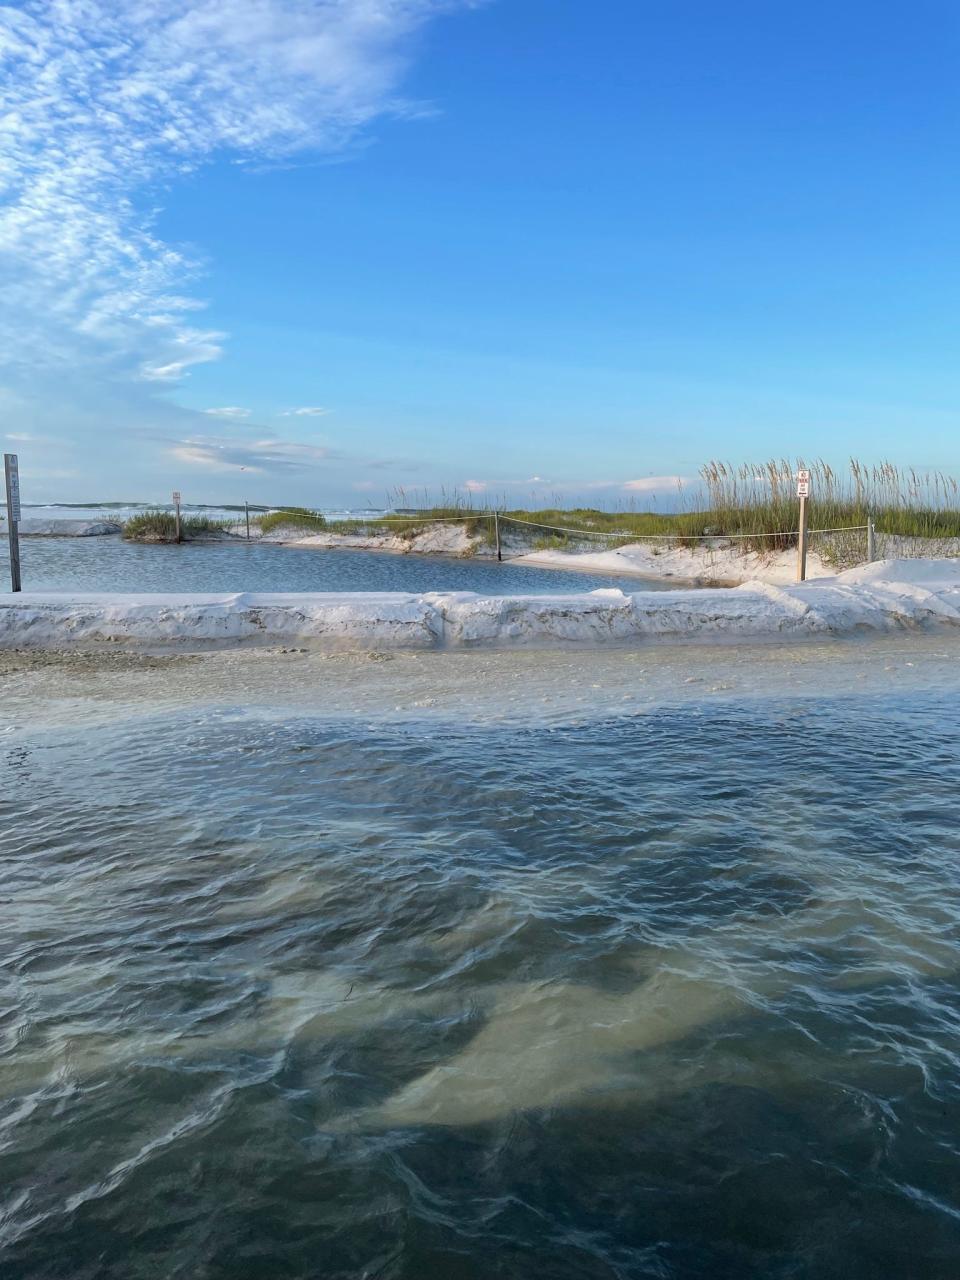 The Gulf Islands National Seashore Santa Rosa Area including Opal Beach Area and State Road 399, and Fort Pickens Area are closed Wednesday, Aug. 30, 2023, due to storm surge from Hurricane Idalia creating standing water up to 2 feet deep in certain areas.